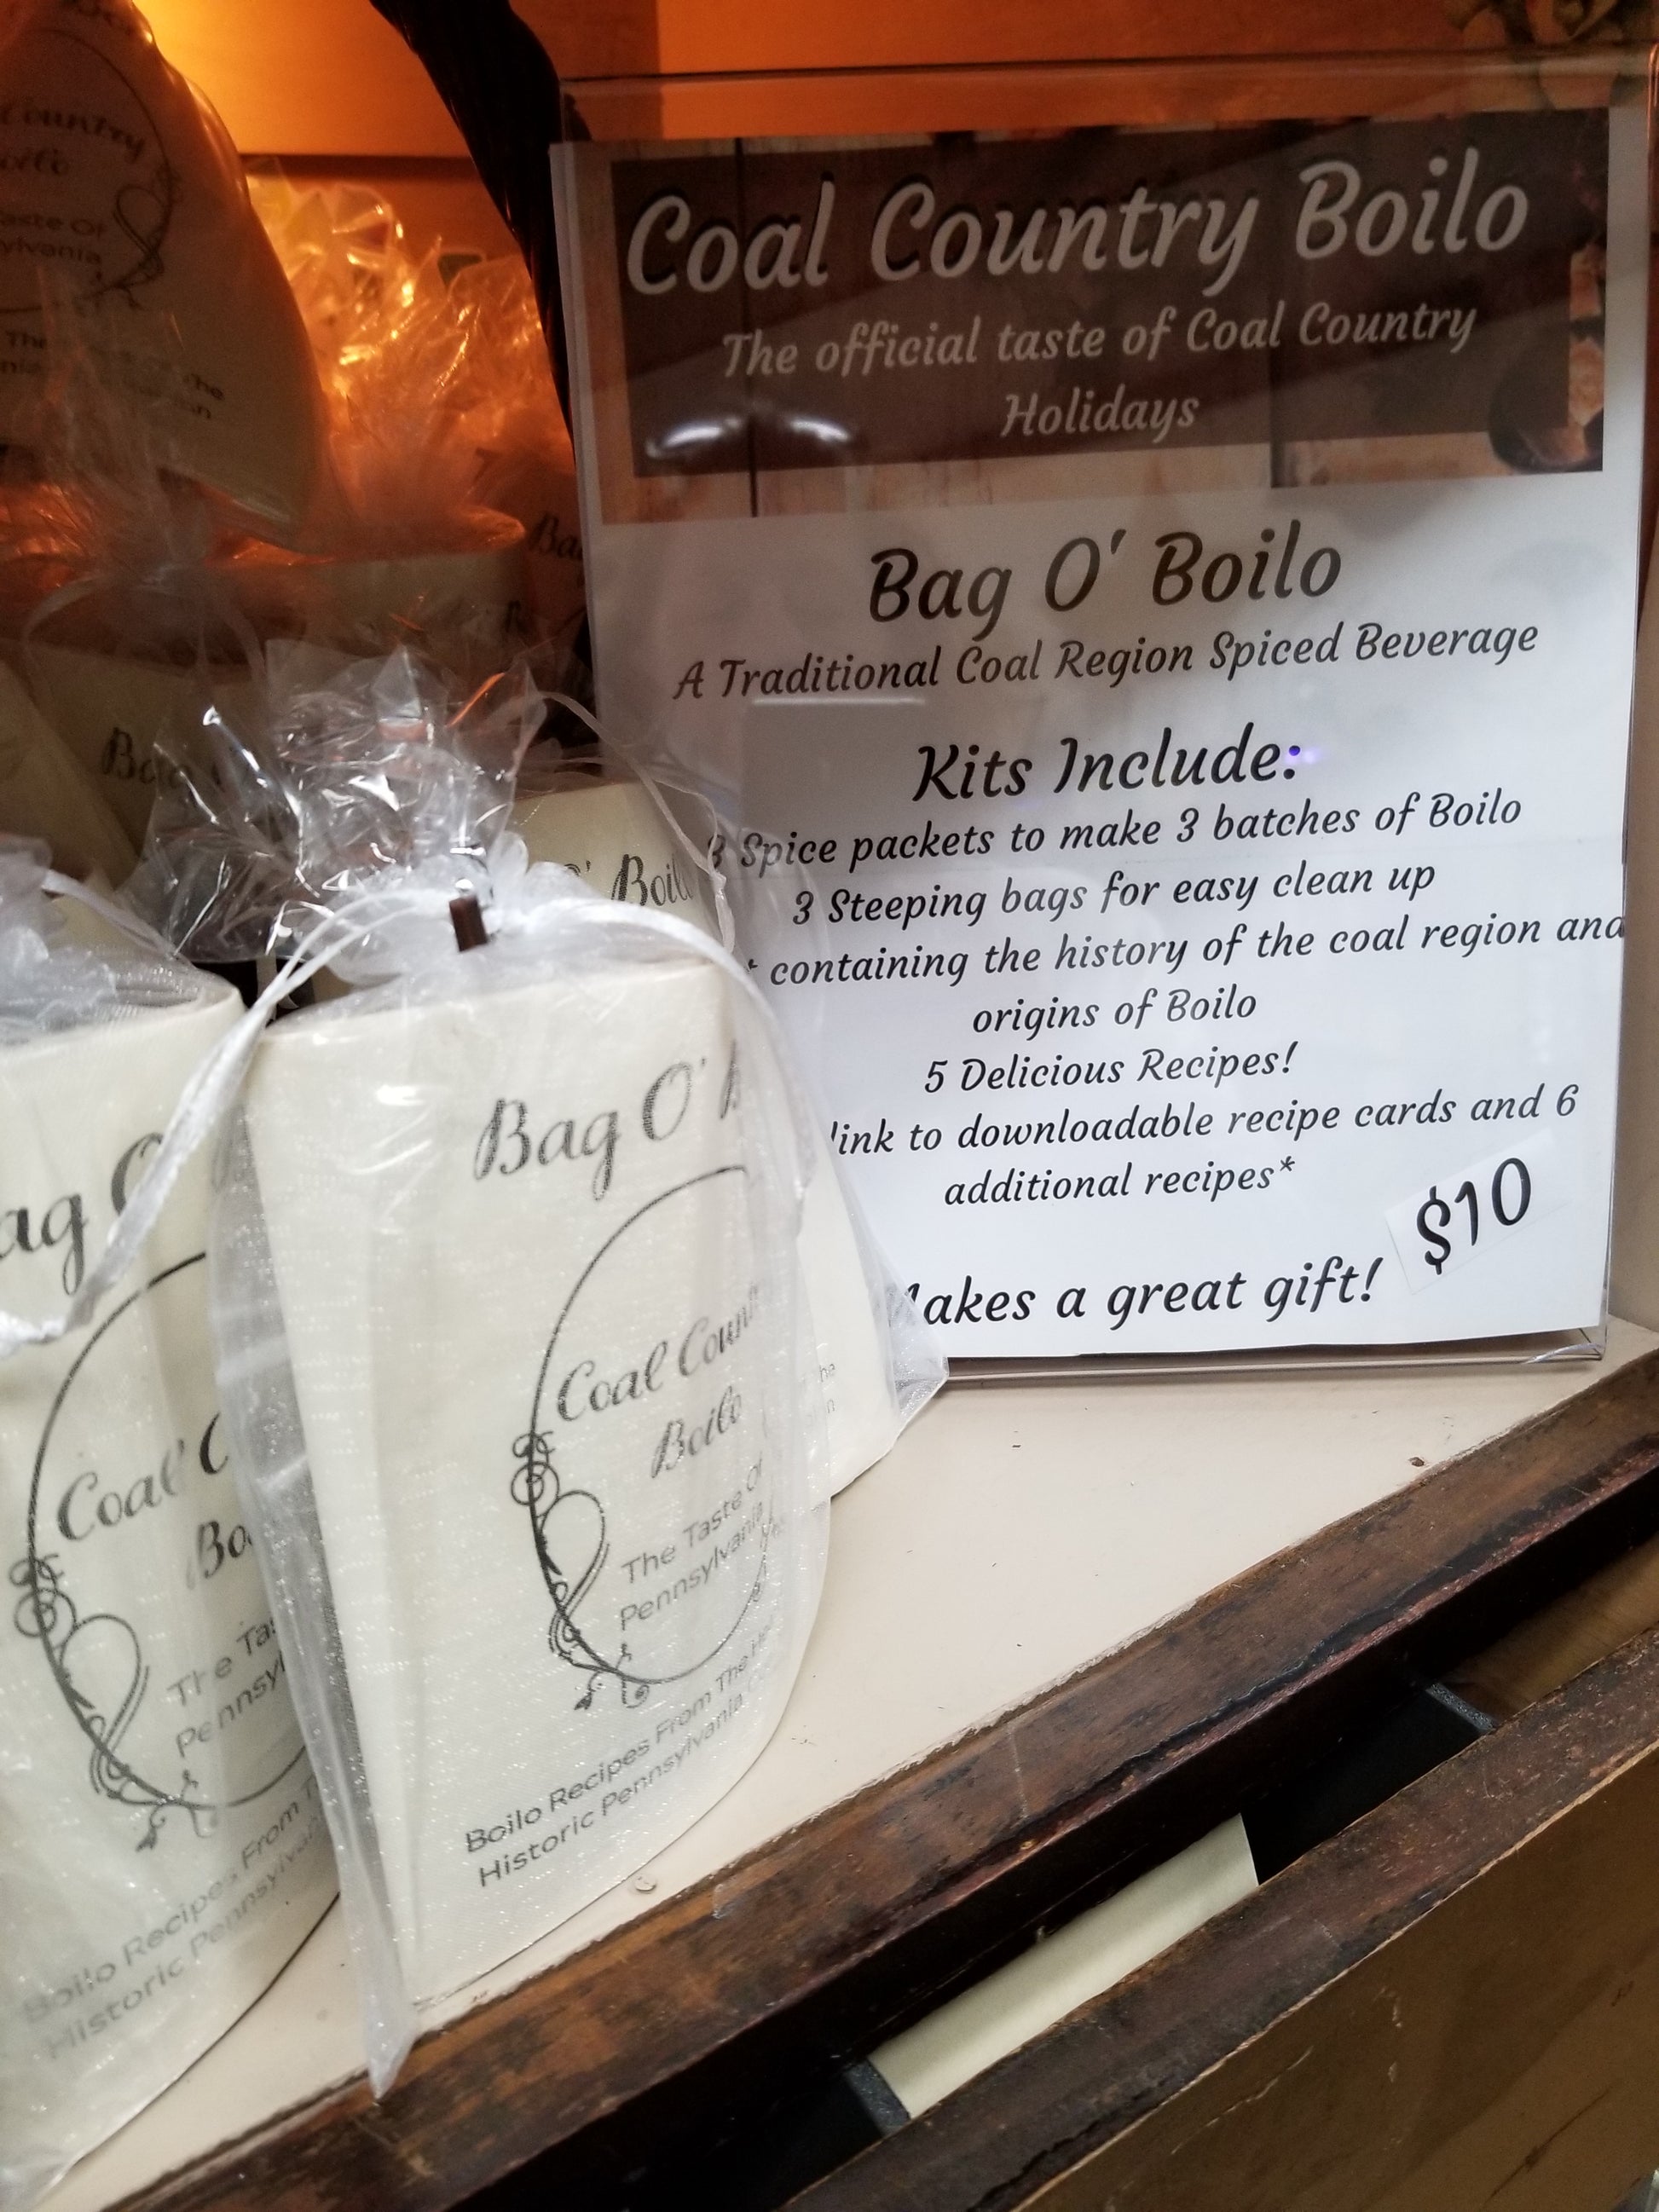 Boilo in a bag by Coal Country Boilo - Tree Of Life Shoppe